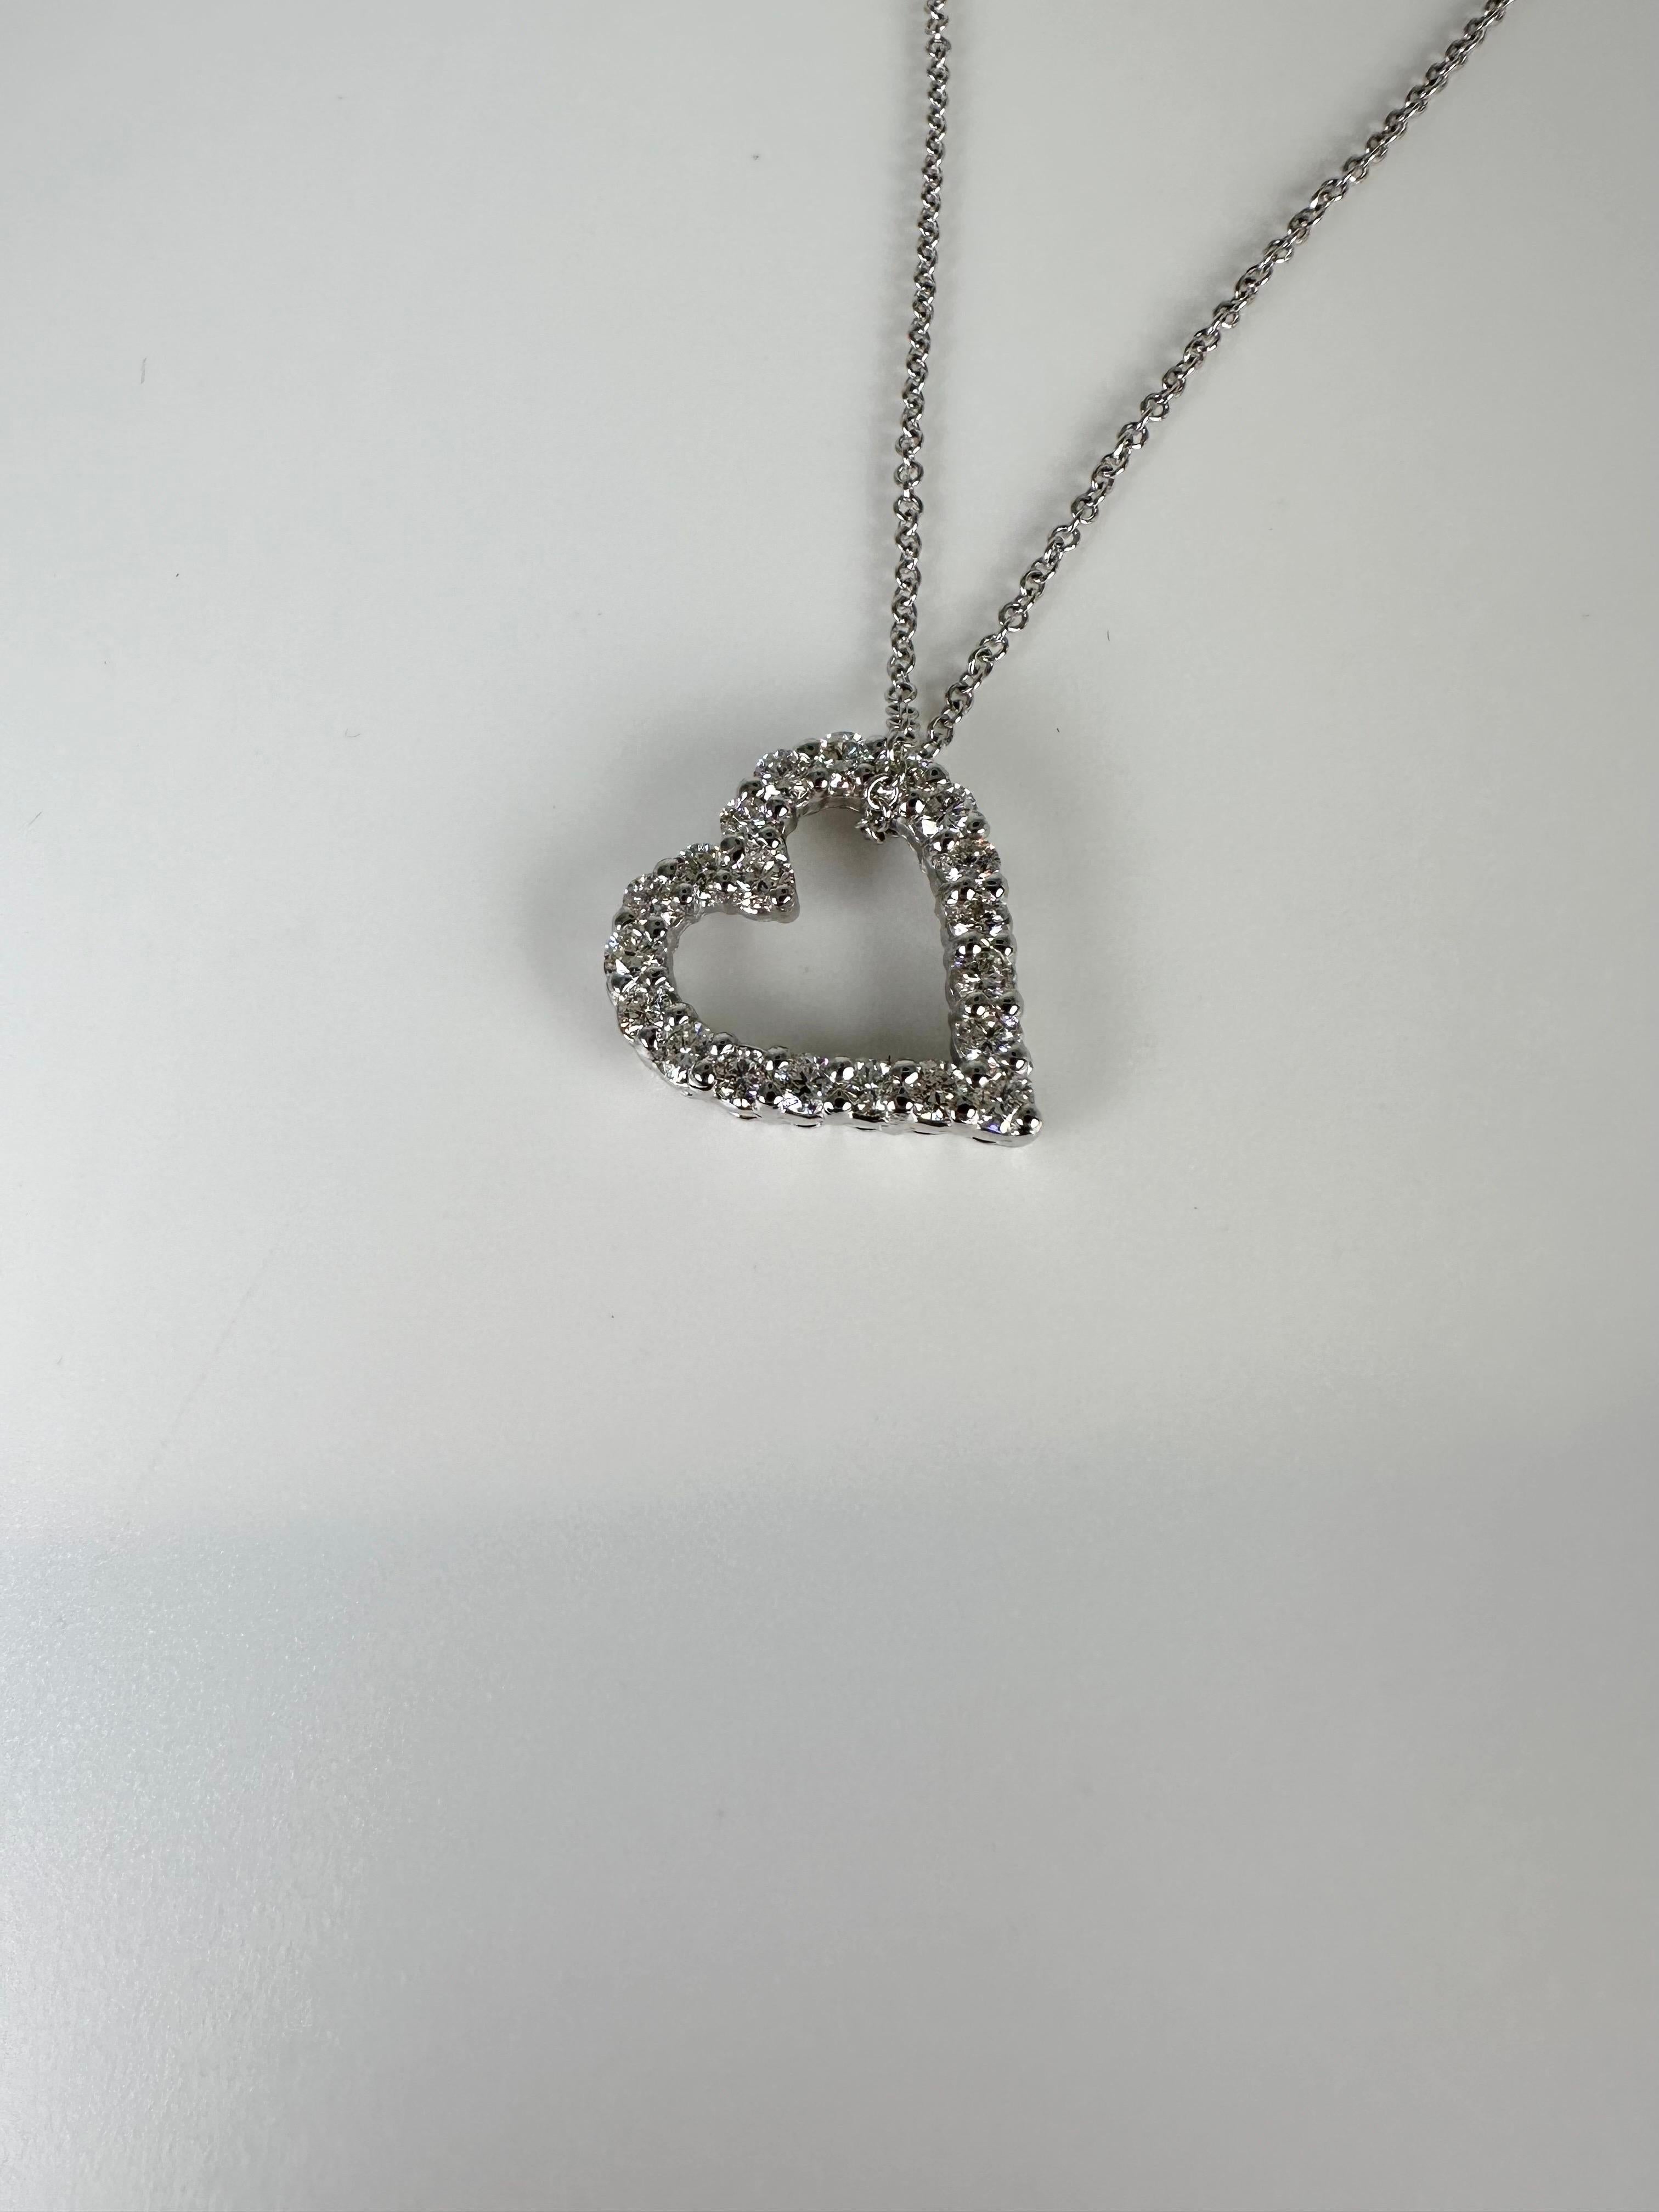 Diamond heart necklace in 14KT white gold, lovely pendant with a lot of sparkle, very well crafted with a modern style chain 16